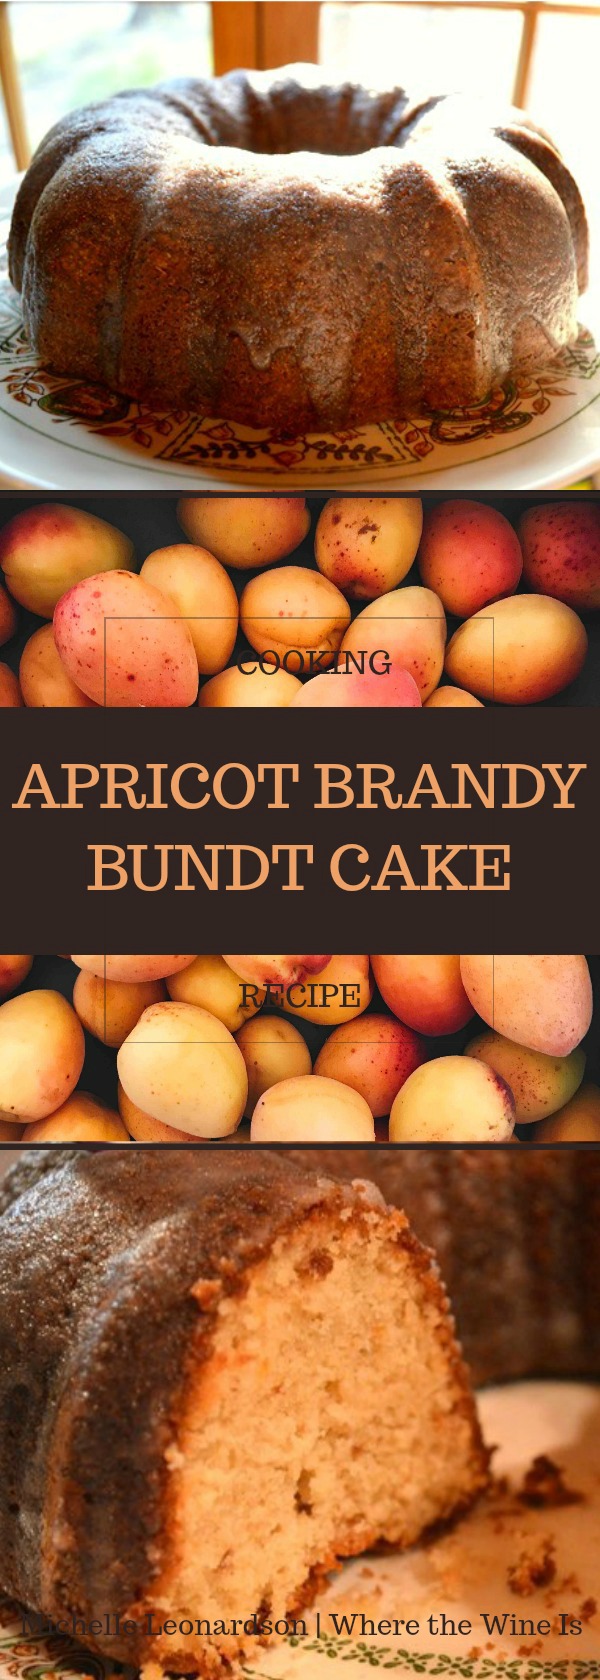 The addition of apricot brandy makes this the BEST Bundt cake recipe ever! This apricot brandy Bundt cake is a decadent dessert you'll love!